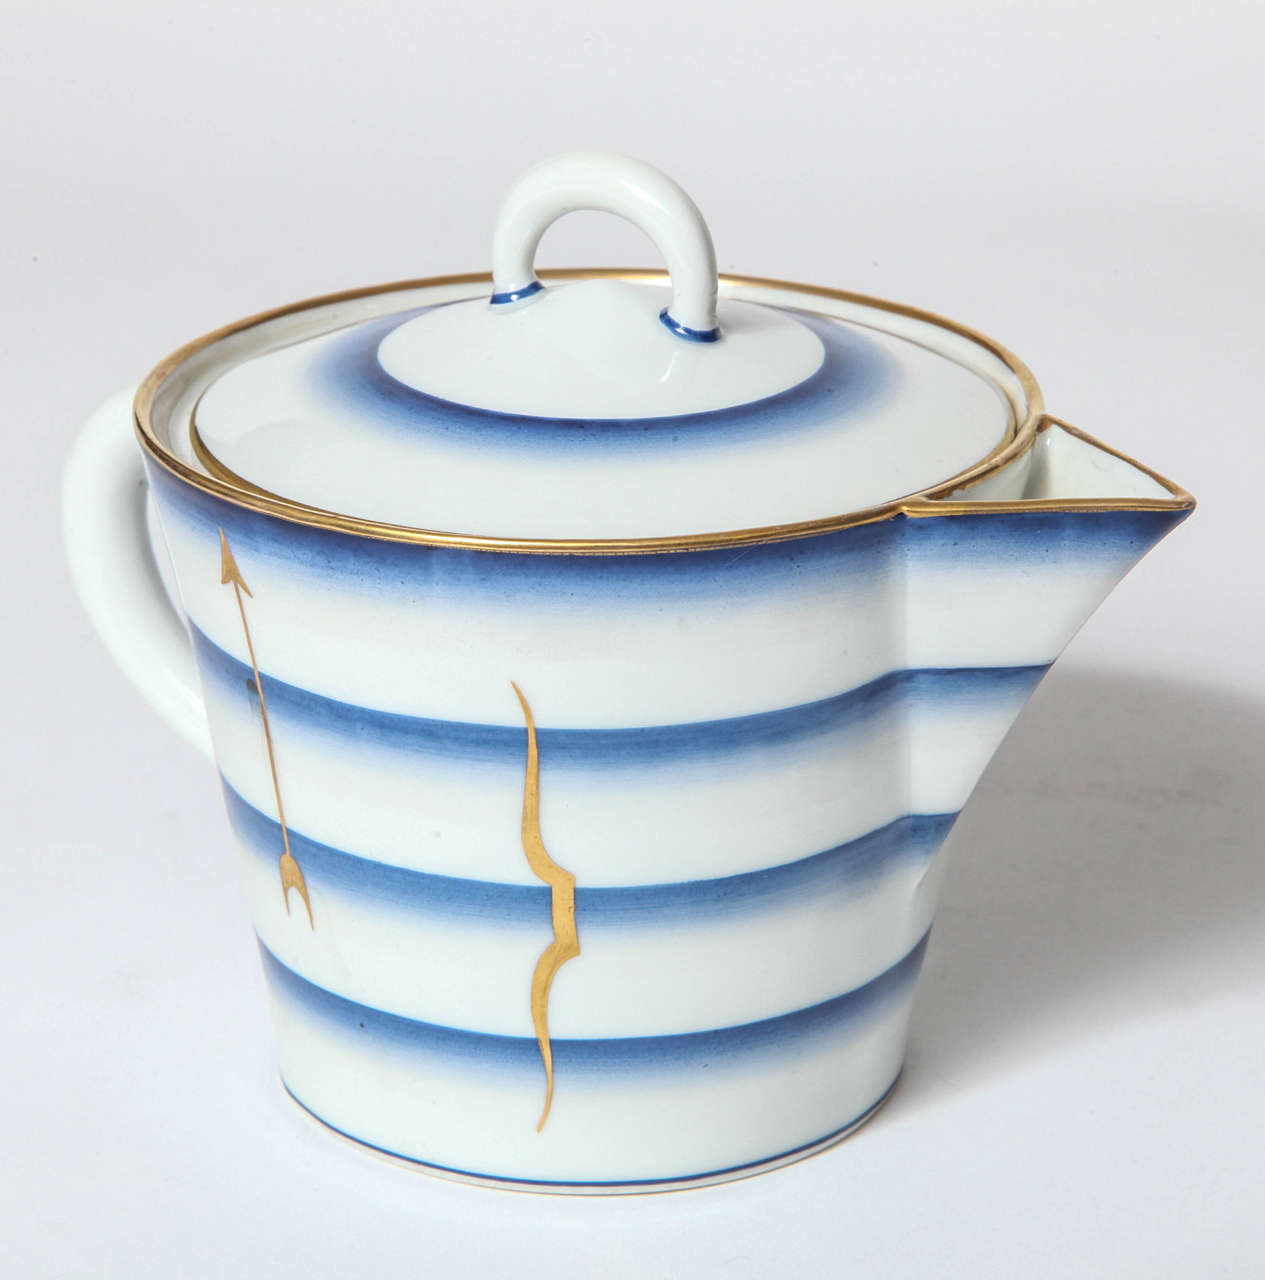 A Gio Ponti designed Italian Art Deco porcelain teapot made by 
Richard Ginori, blue, white and gold stylized blue bands and hand-painted stylized bows and arrows.